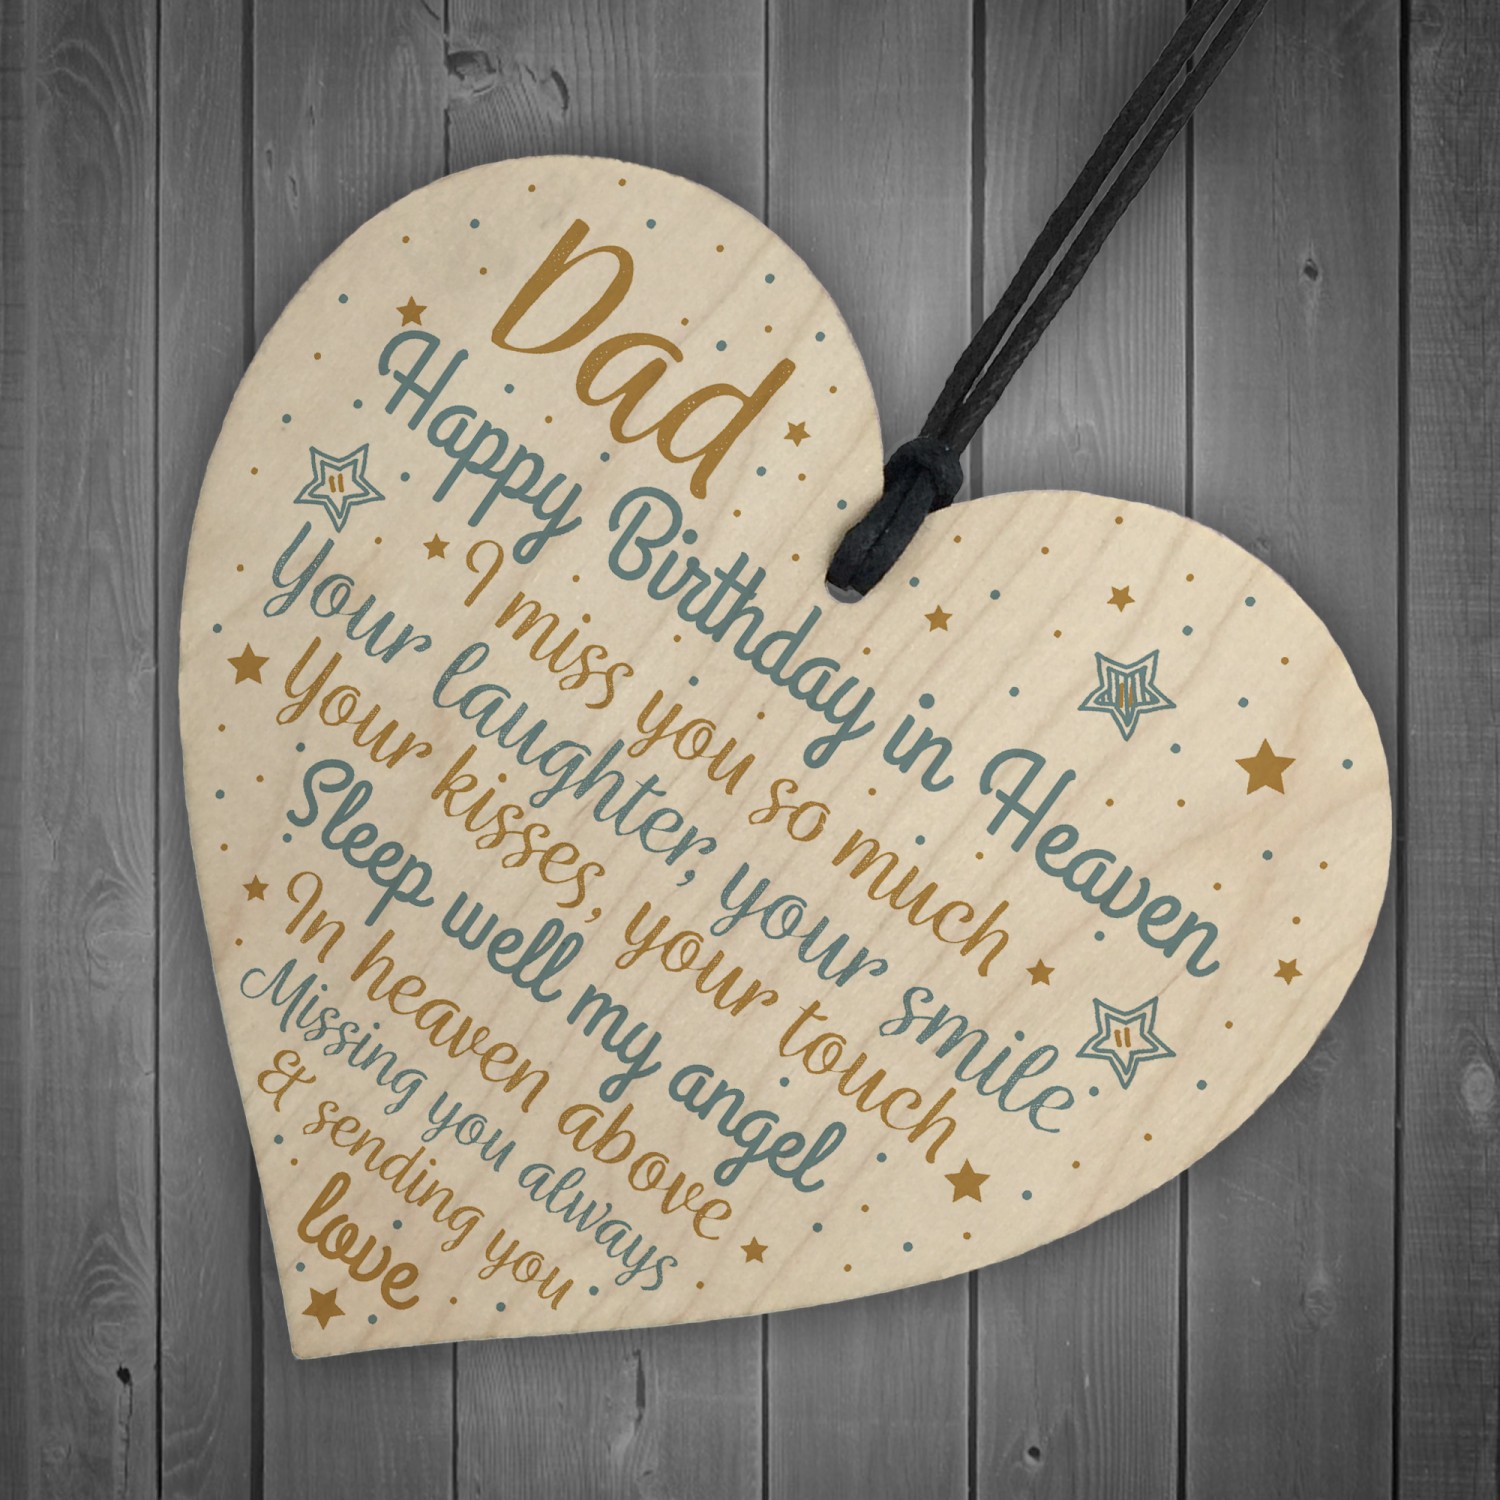 DAD Birthday Memorial Plaque Wood Heart Sign Grave Tribute Gift